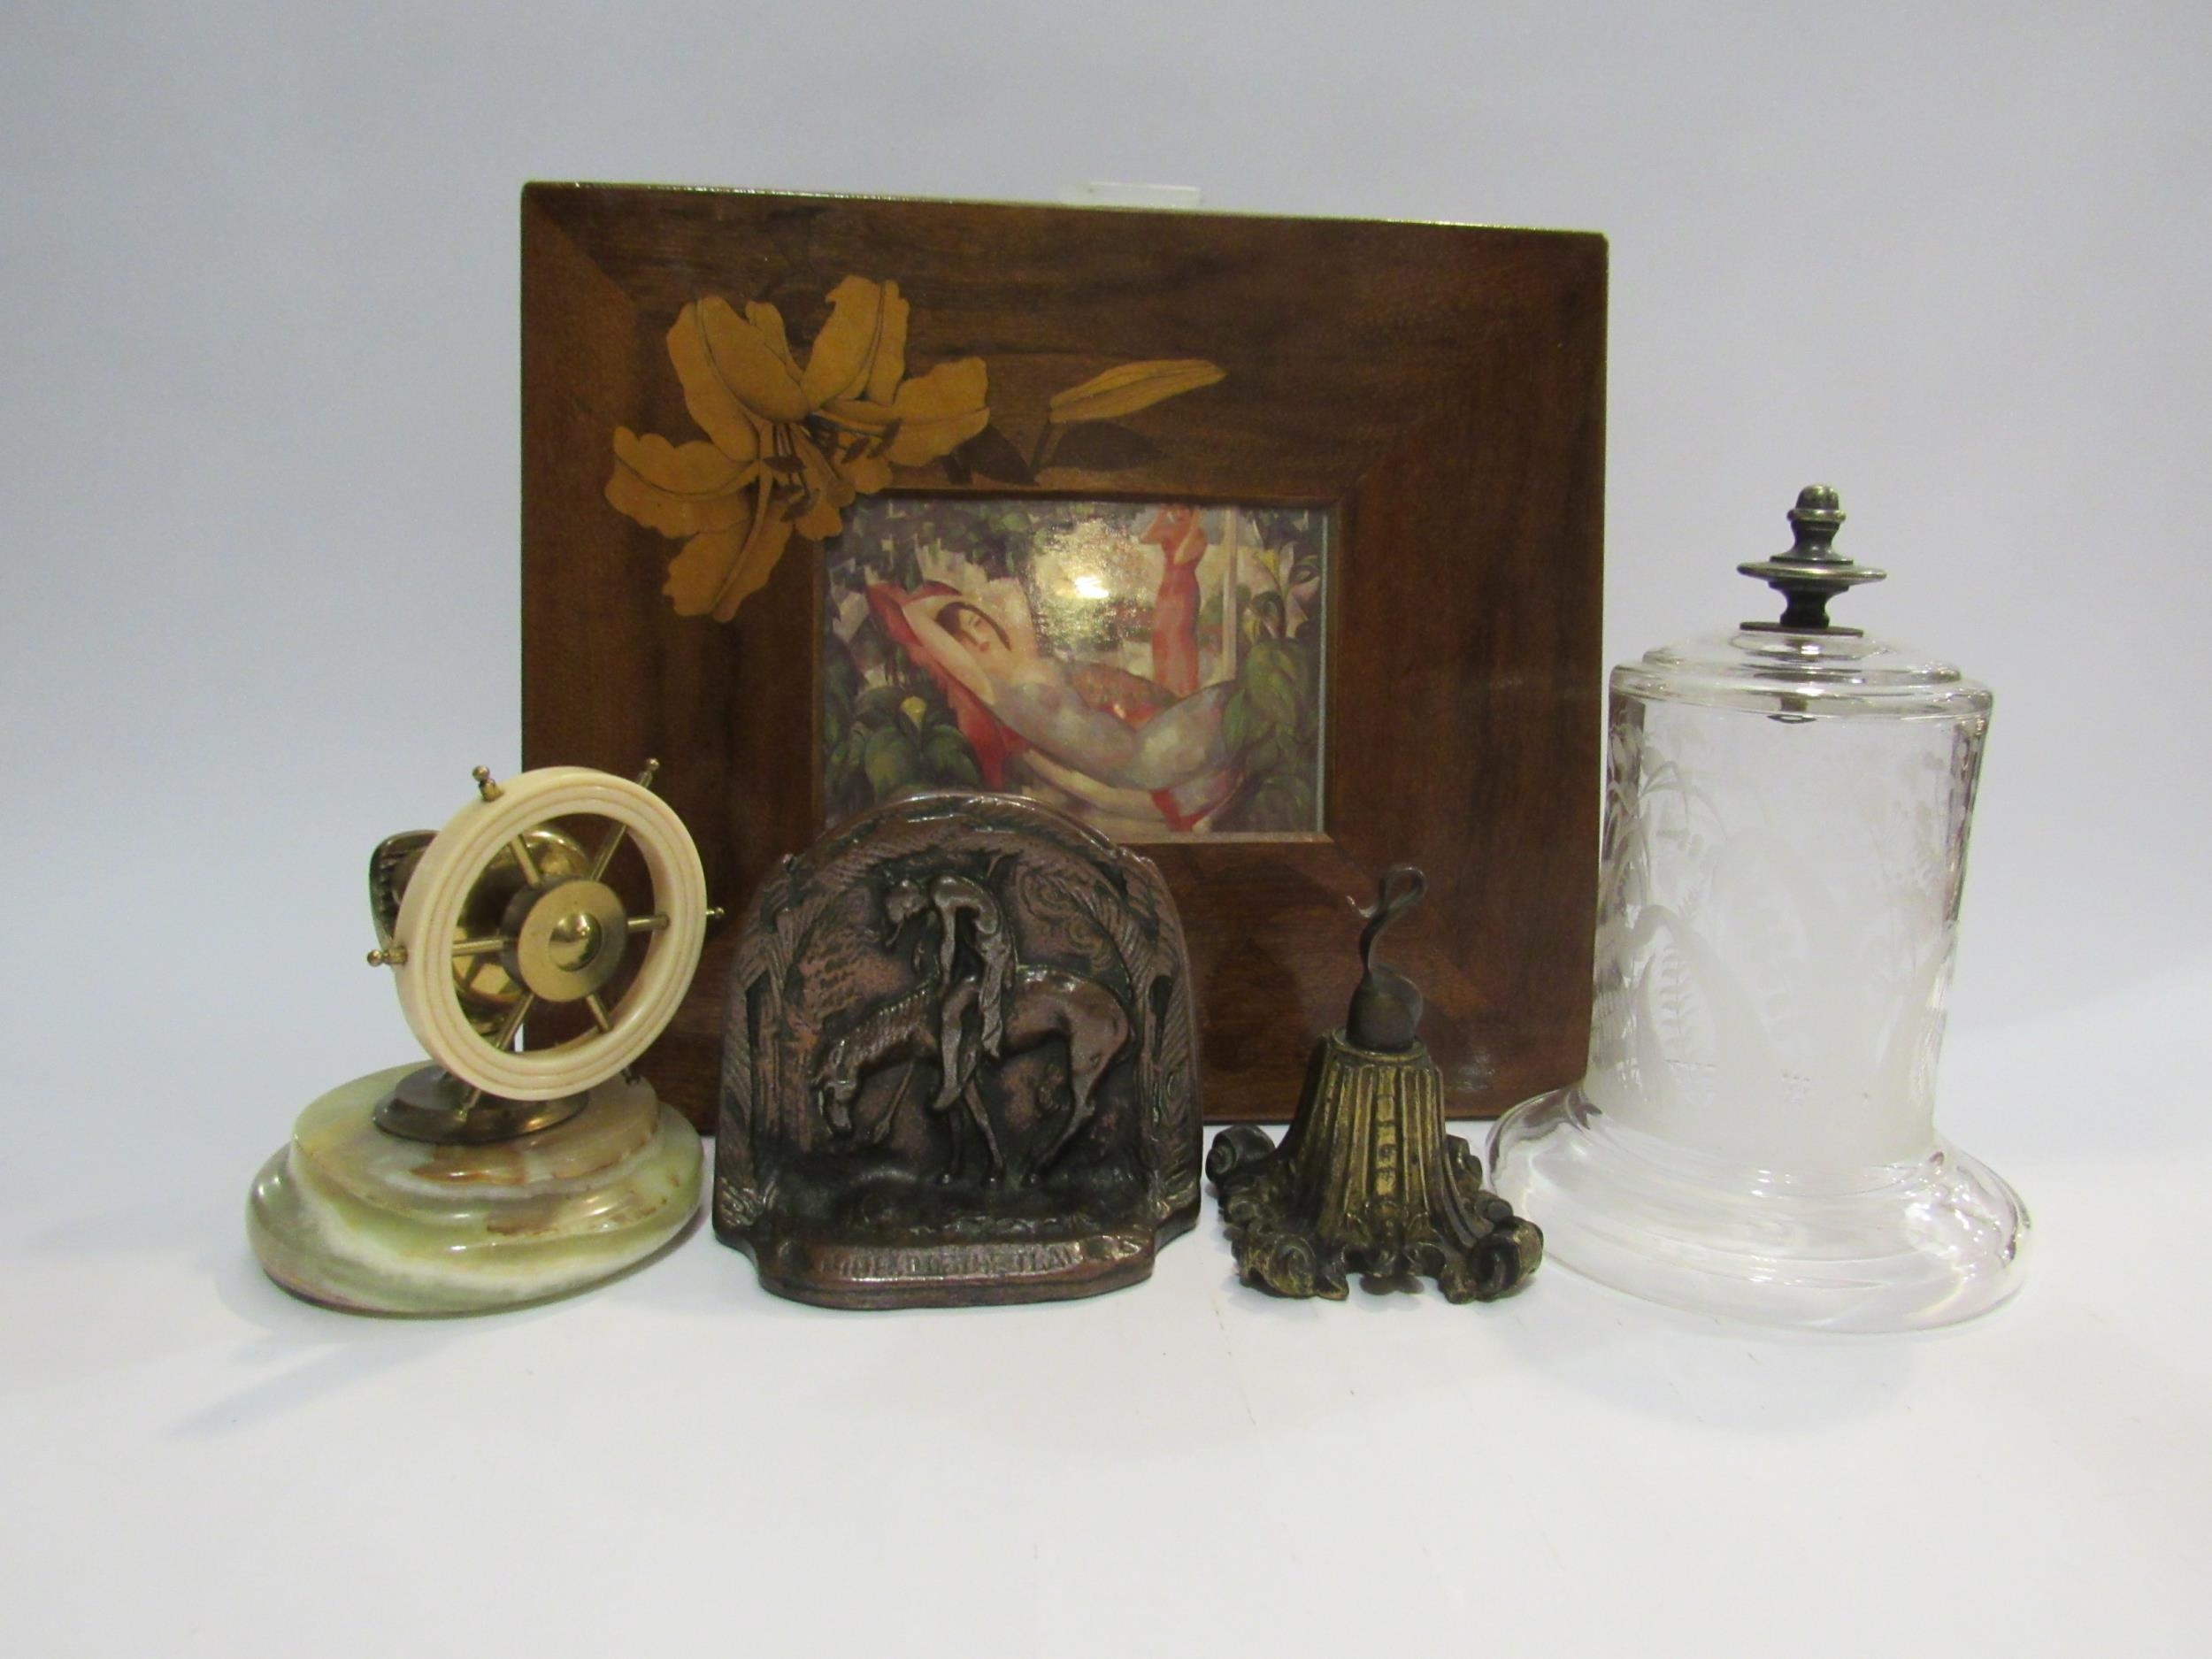 A pair of cast metal bookends, a glass watch dome, a watch holder, ships wheel nutcracker and